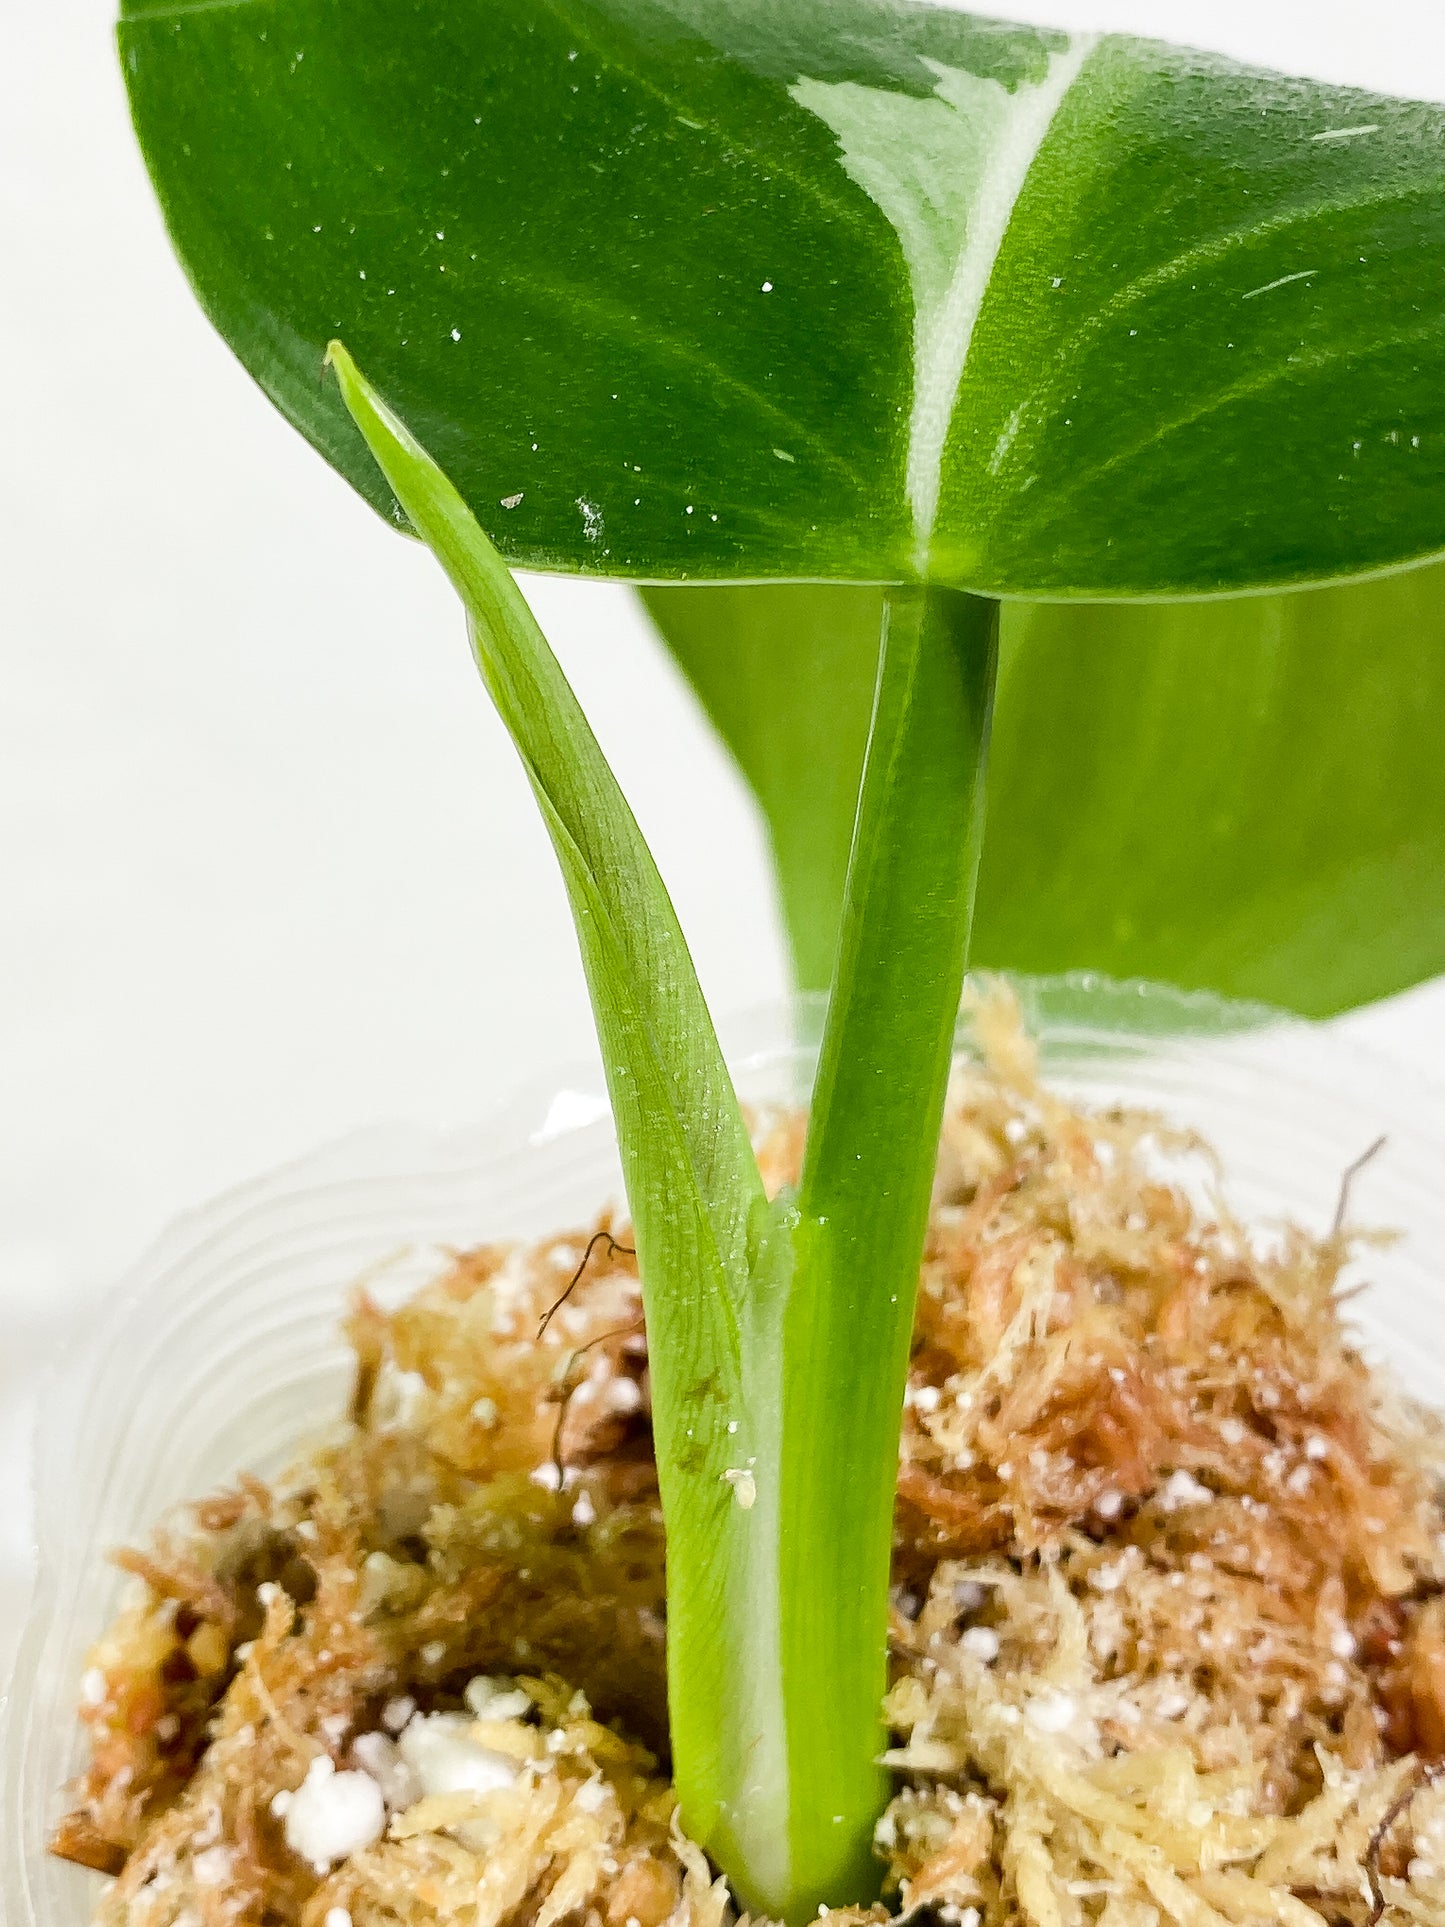 Philodendron White Wizard Rooting 3 leaves Top Cutting